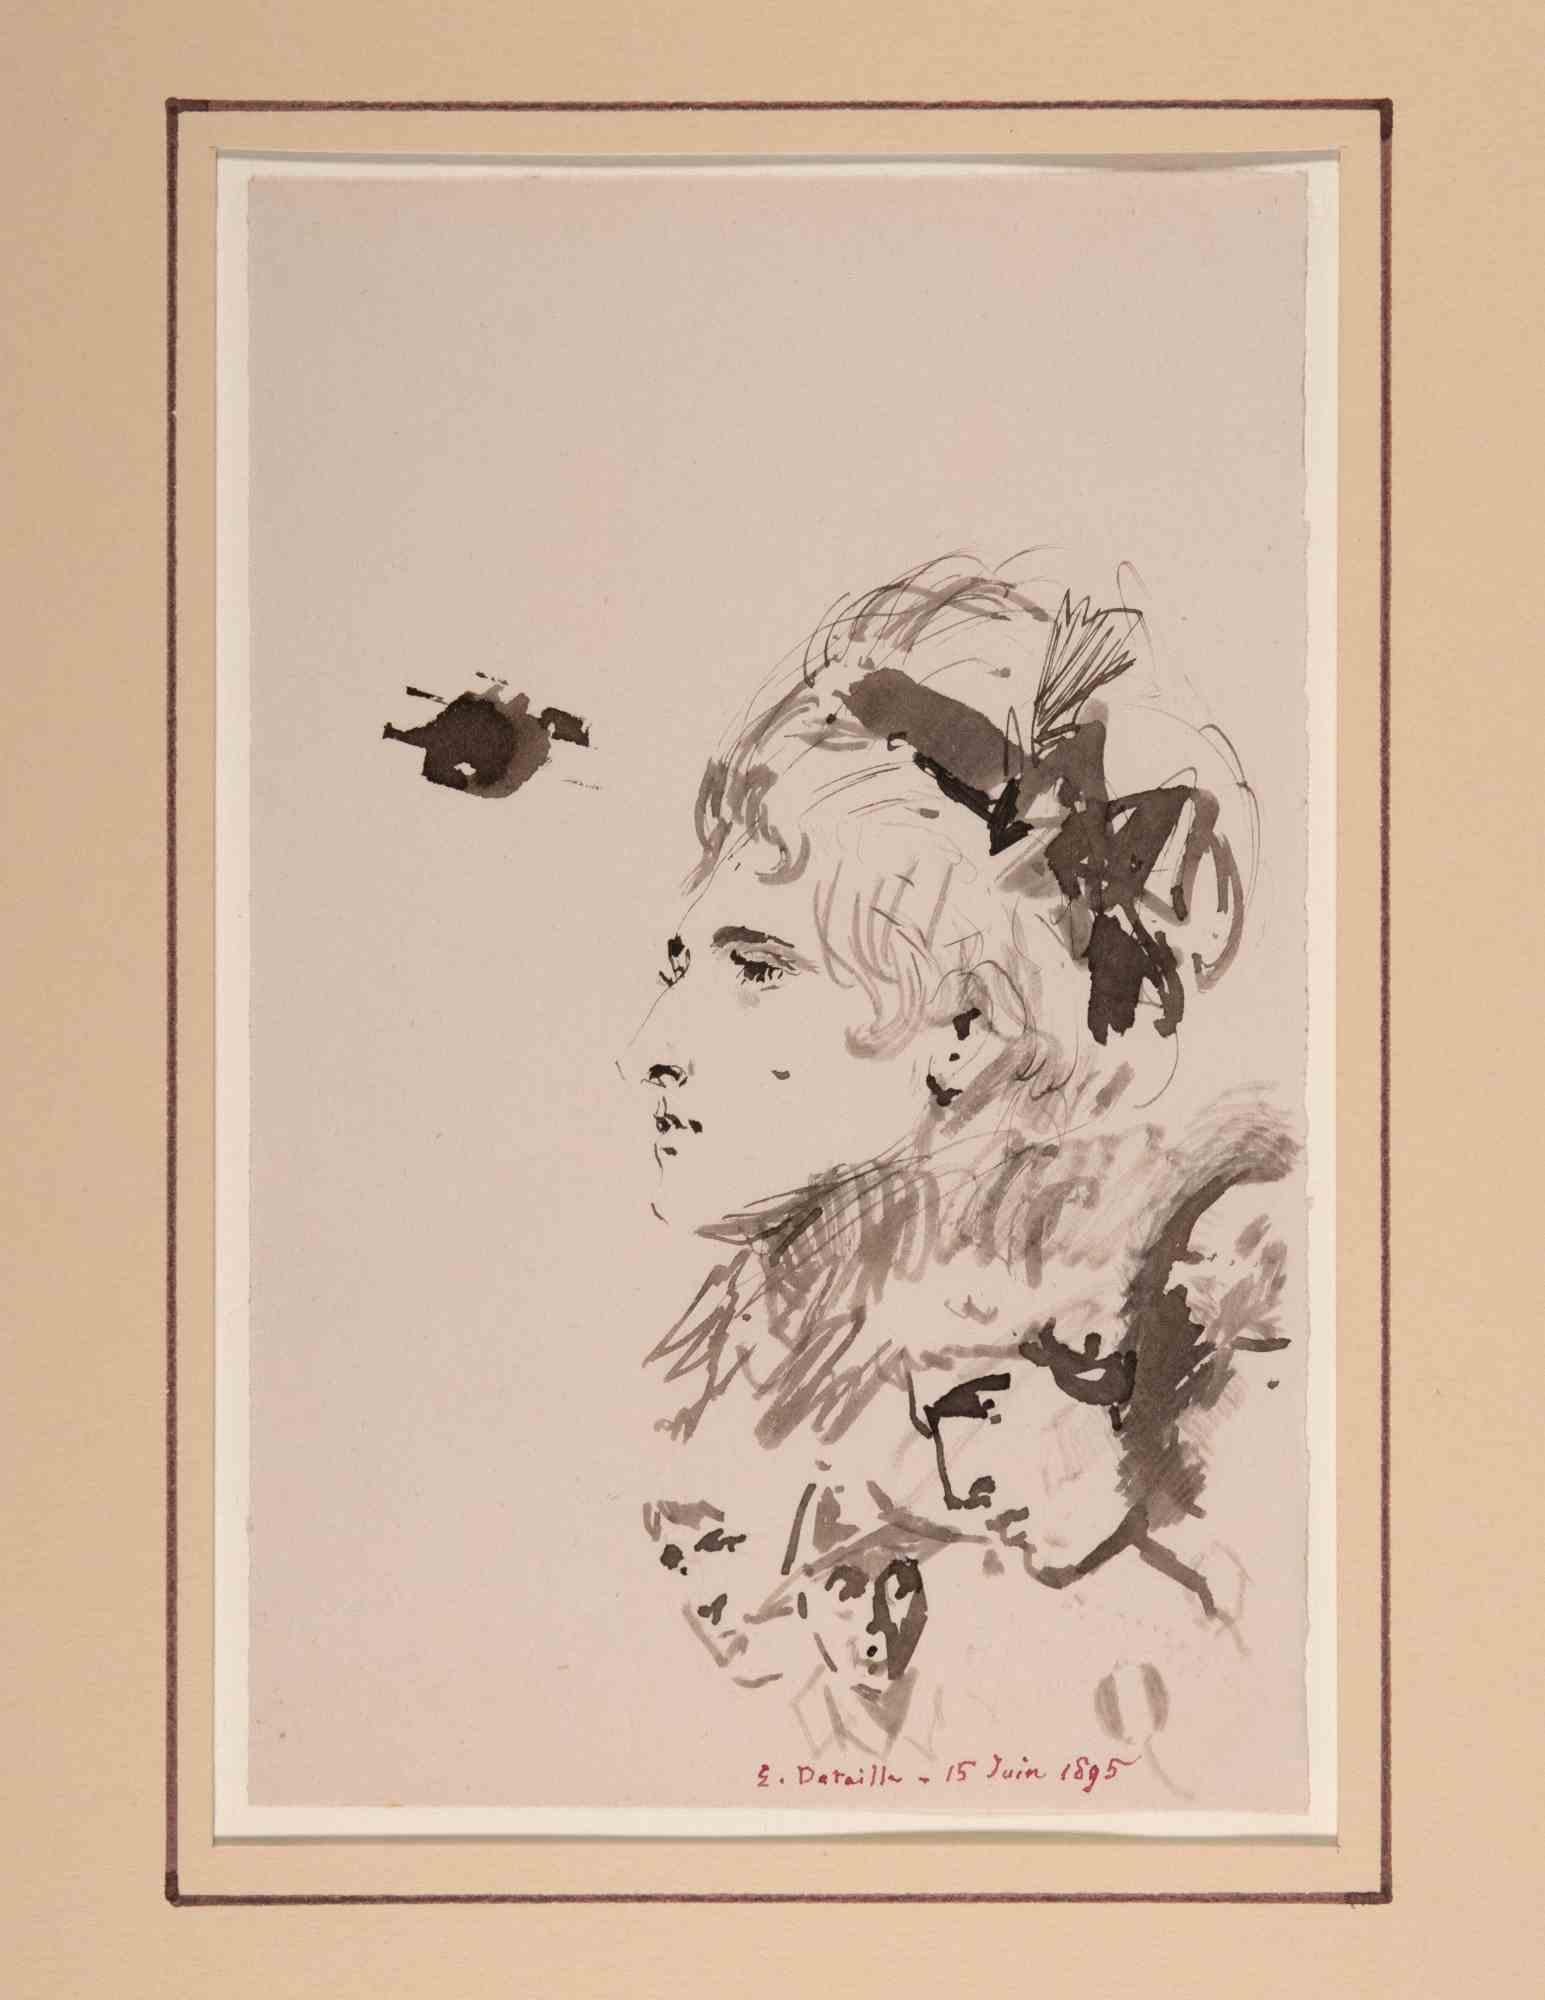 Head of Woma and Three Sketches of Portraits- Drawing by E. Detaille - 1895